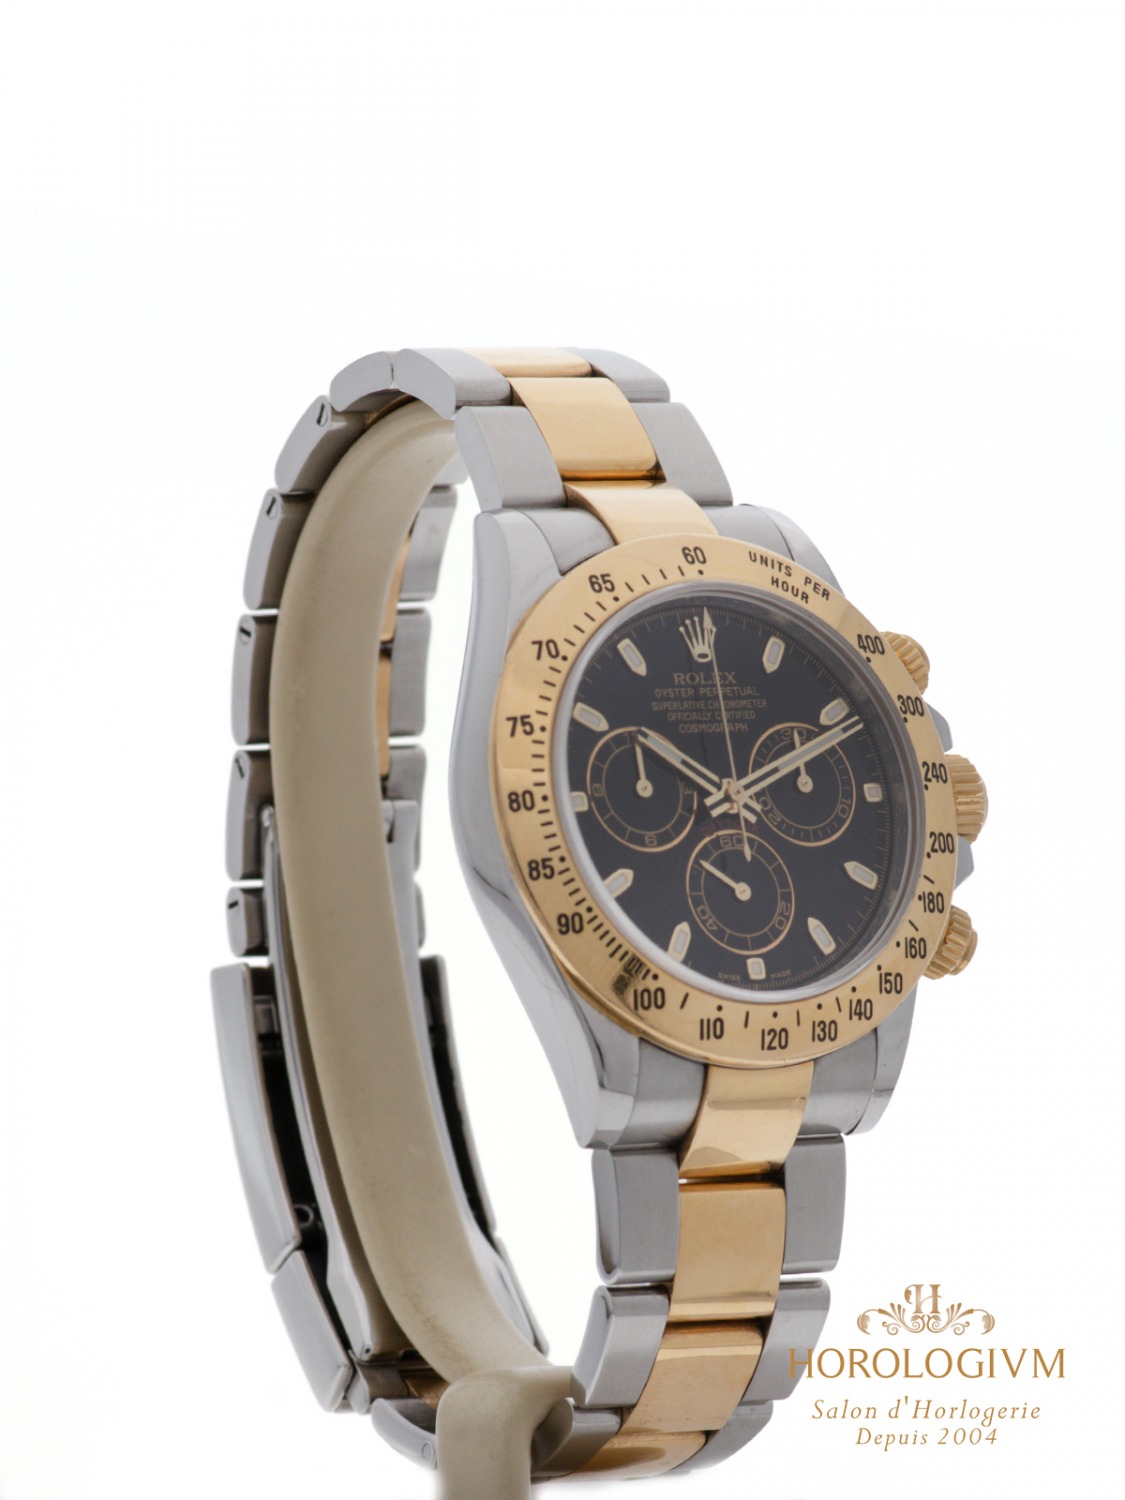 Rolex Daytona Cosmograph Two-Tone REF. 116523 watch, two-tone (bi-colored) silver & yellow gold (case) and yellow gold (bezel)